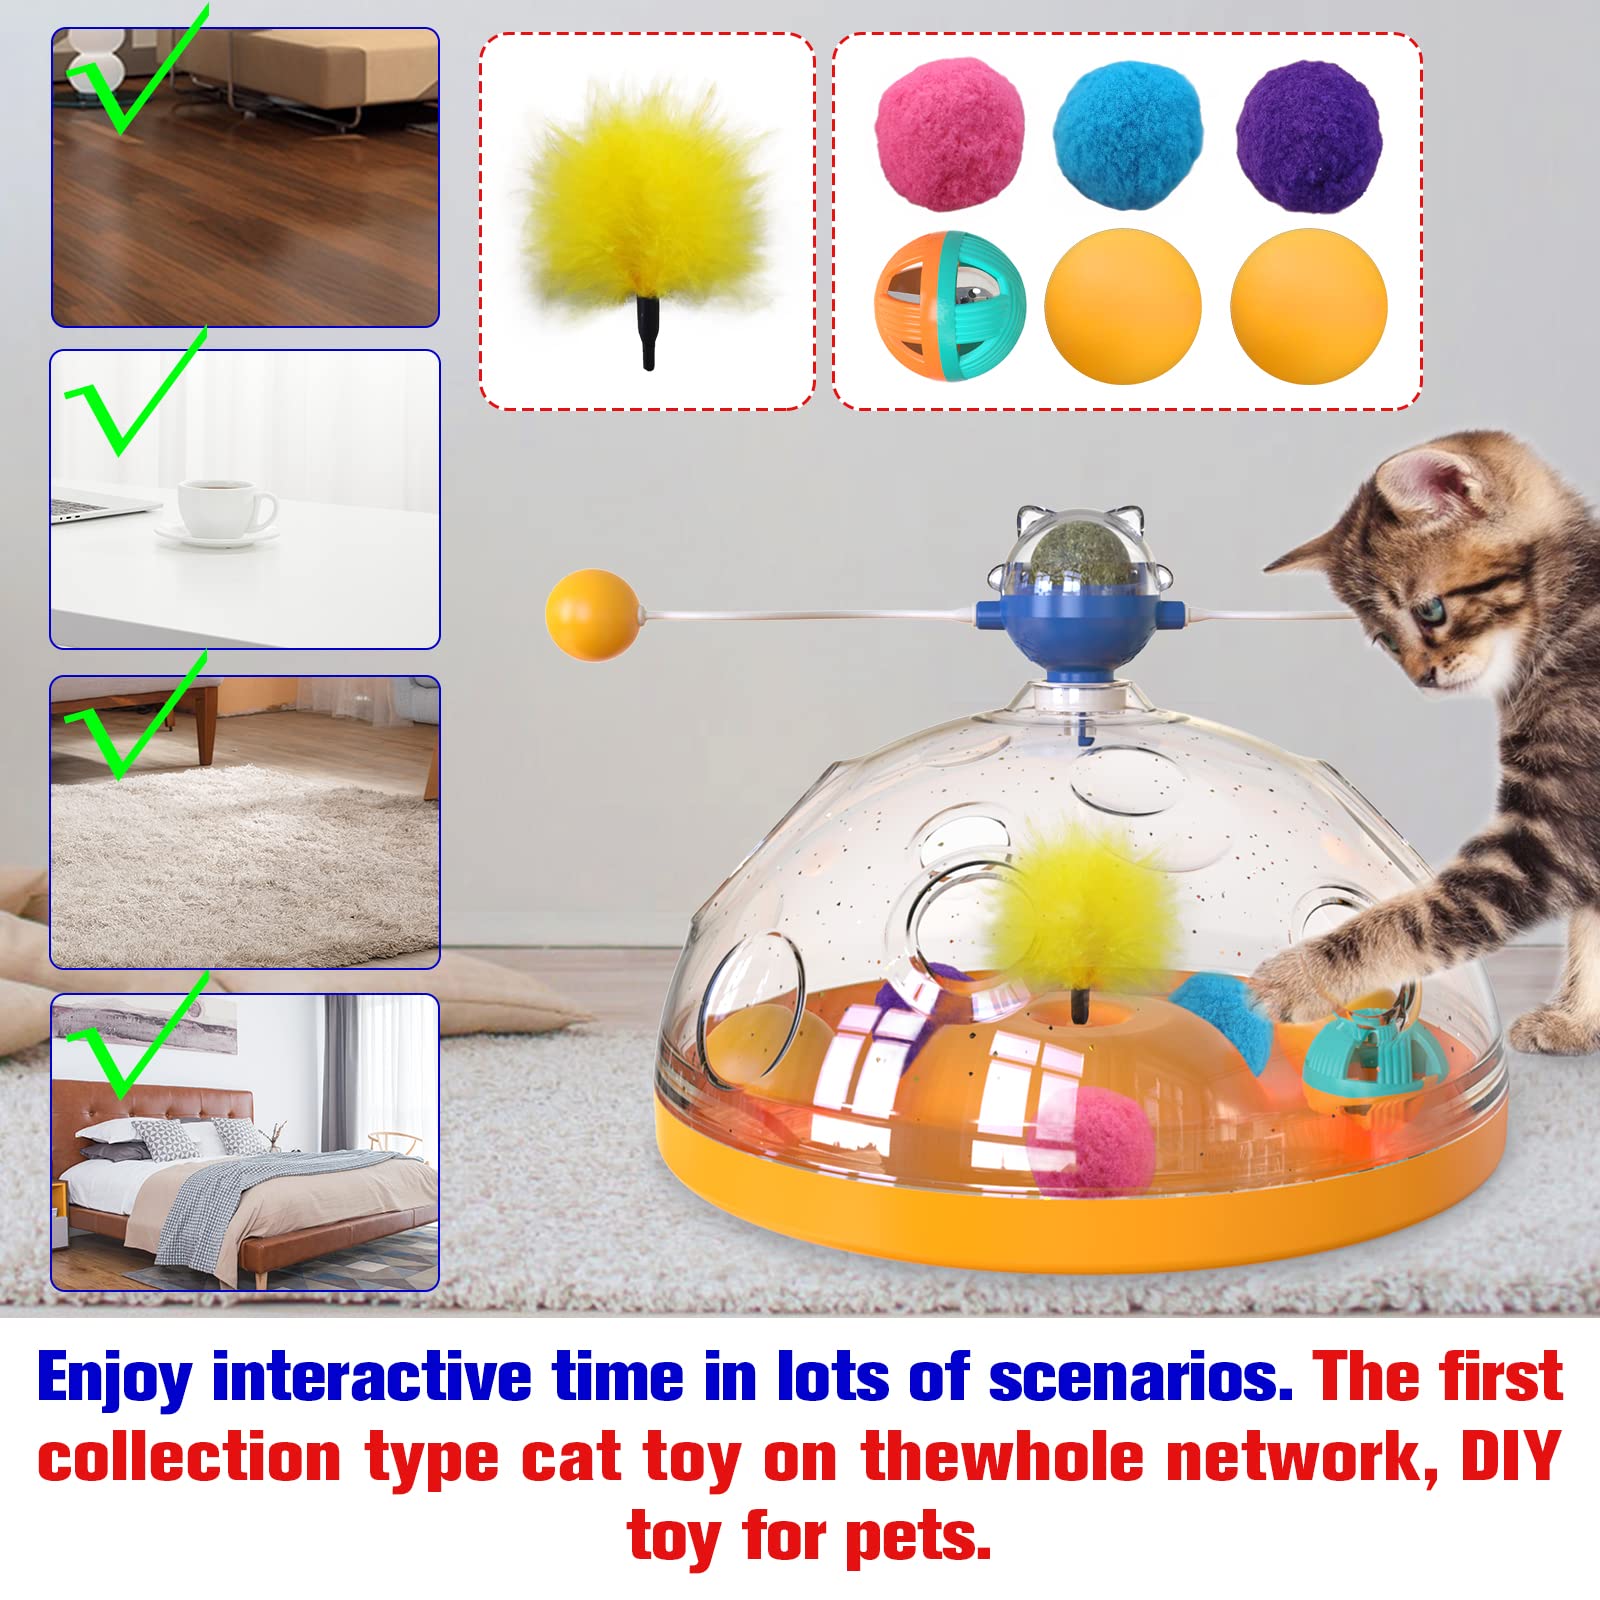 Puzzle Feeder Cat Toys for Indoor Cats, Interactive Cat Toys Bored Cats,  Silicone Cat Treat Puzzle Making Feeding Happier, Yellow